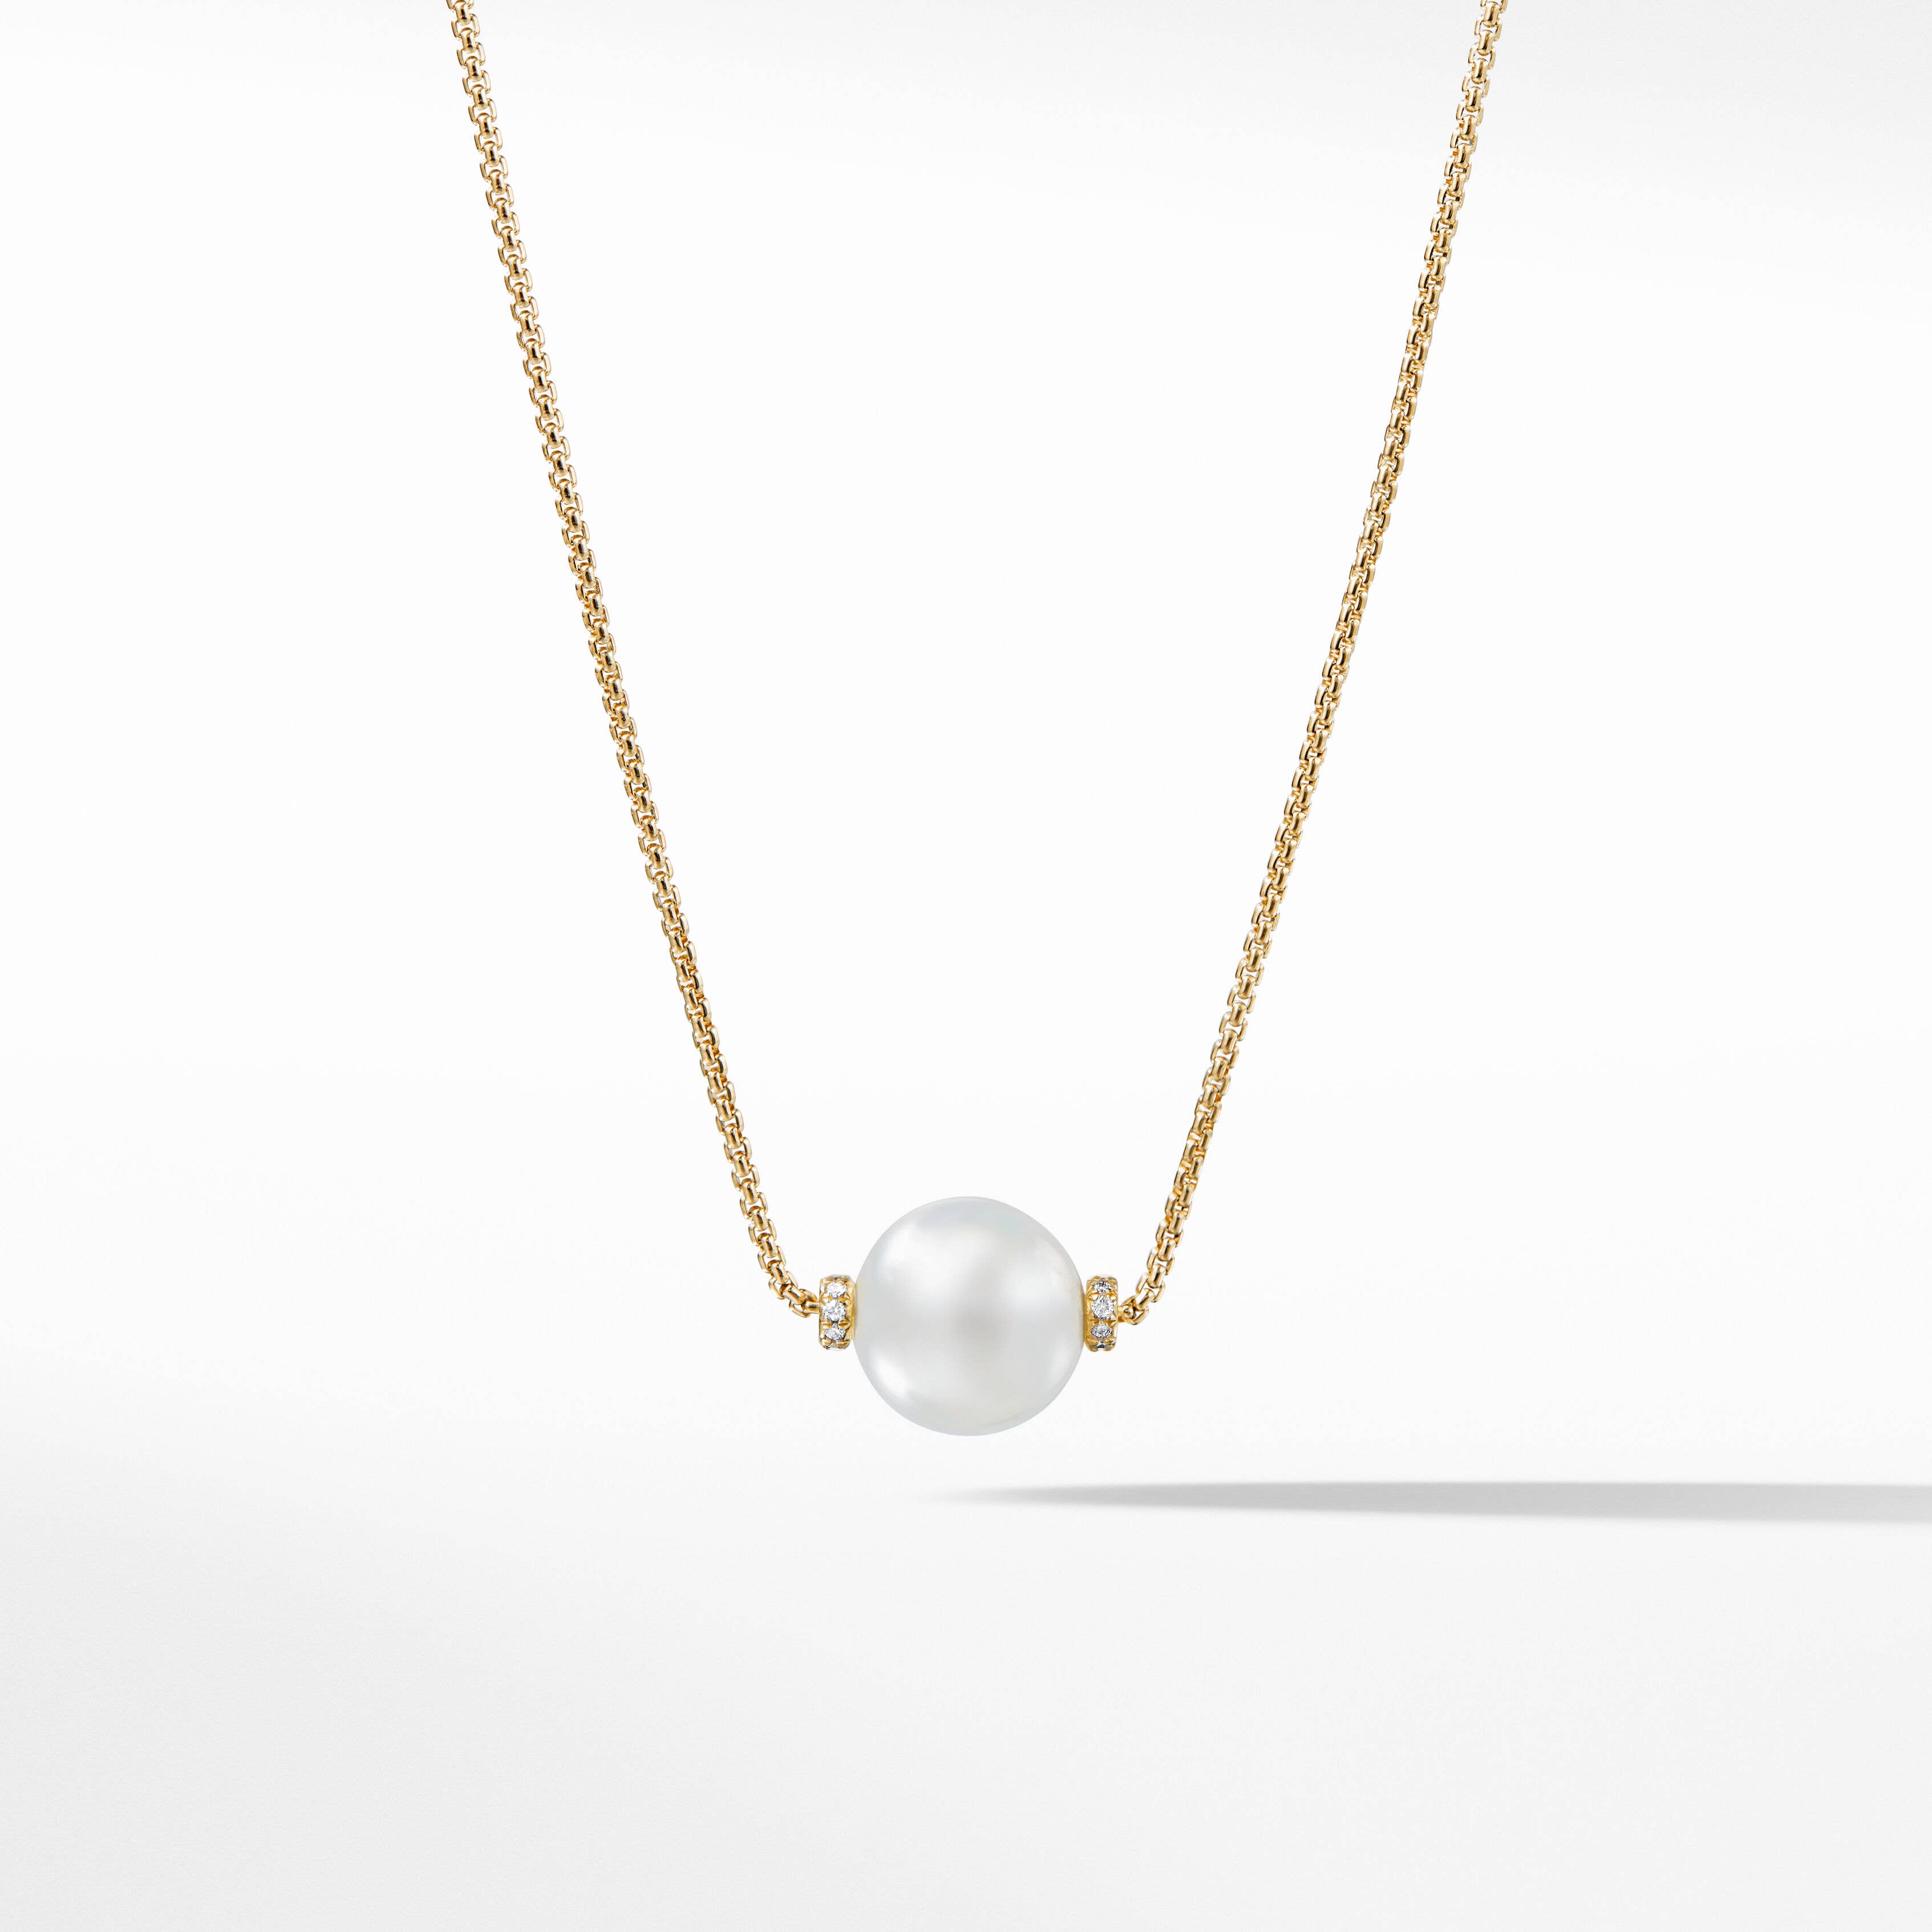 Solari Single Station Necklace in 18K Yellow Gold with South Sea Pearl and Pavé Diamonds